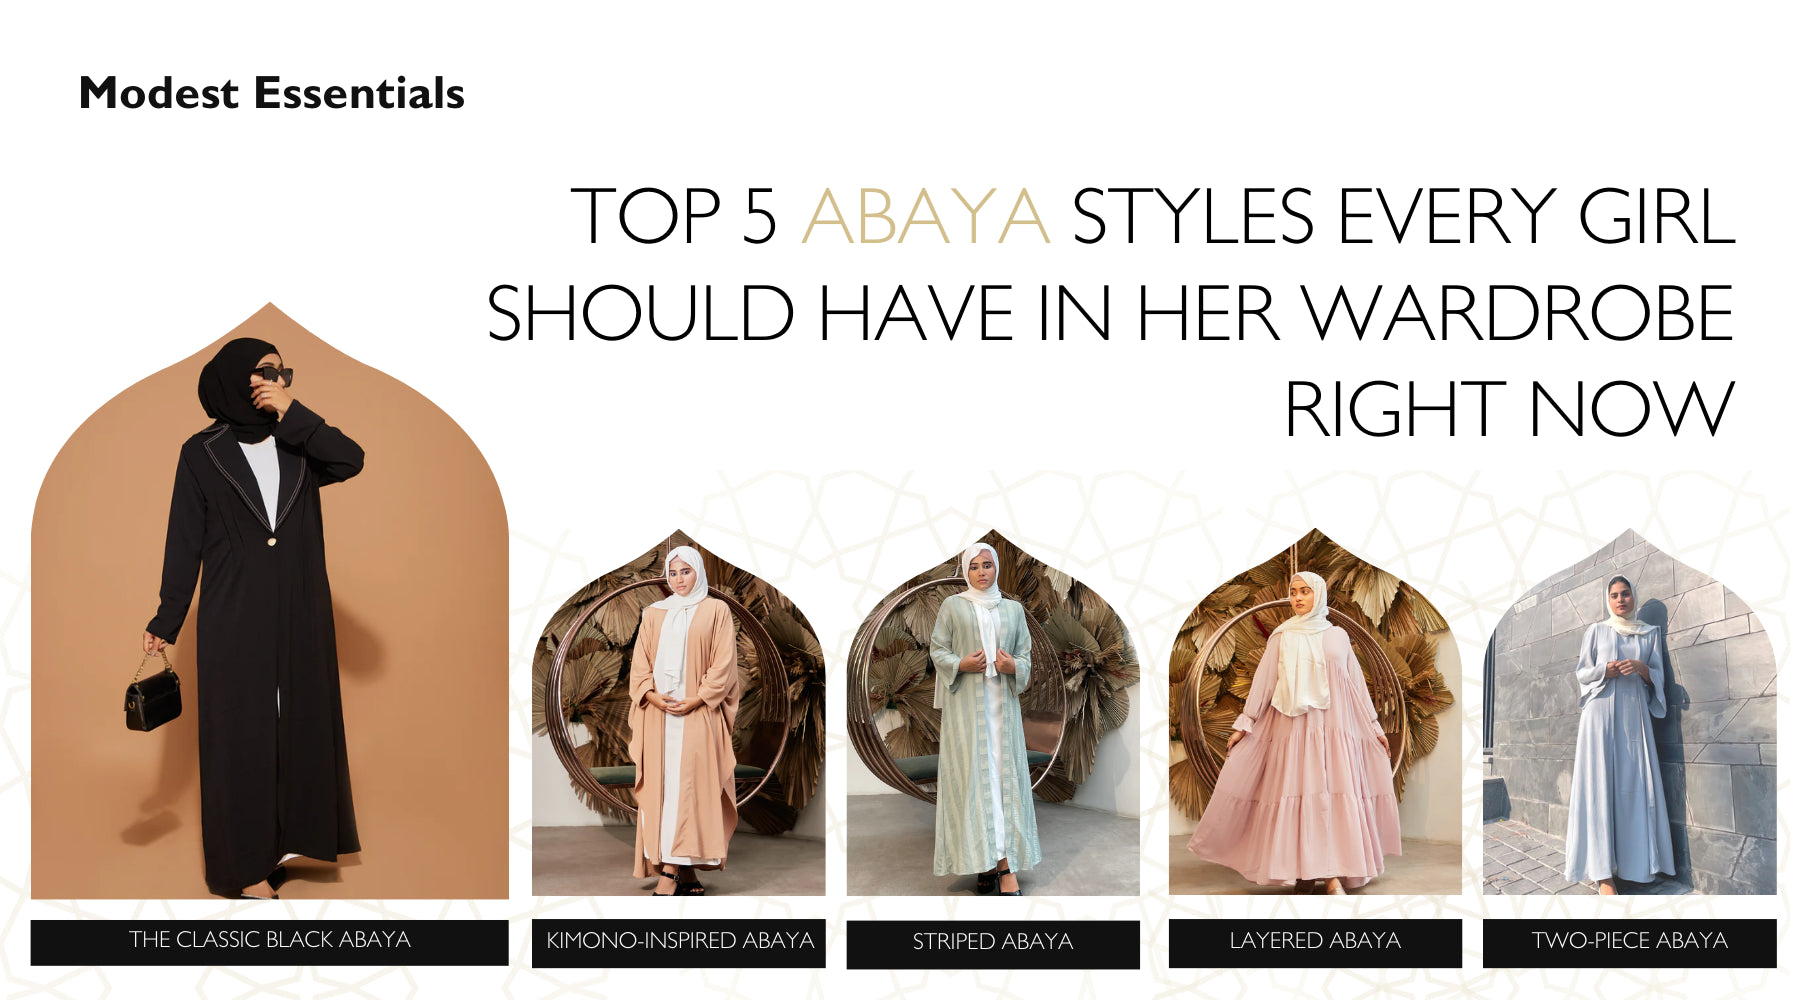 Top 5 Abaya Styles Every Girl Should Have in Her Wardrobe Right Now –  Modest Essentials